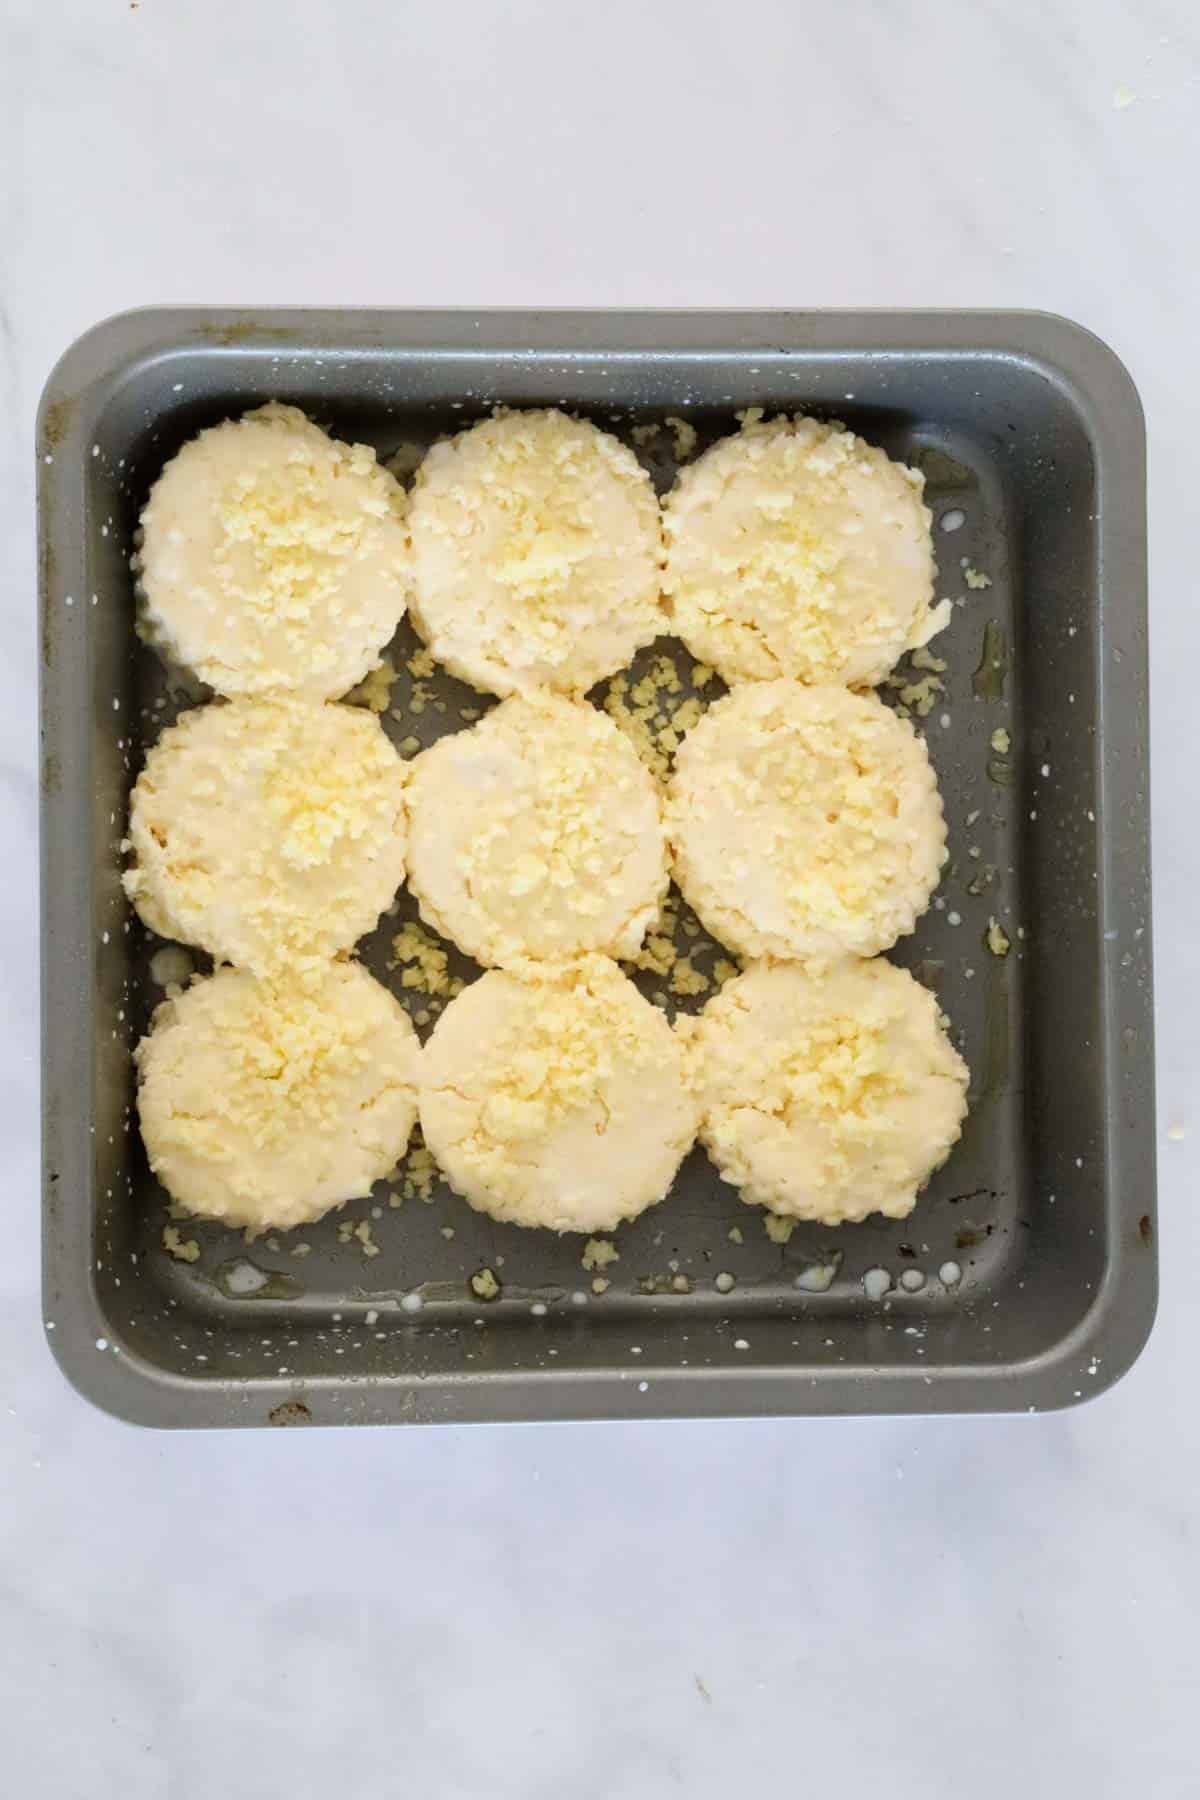 Scones placed in a baking tin and sprinkled with grated cheddar.